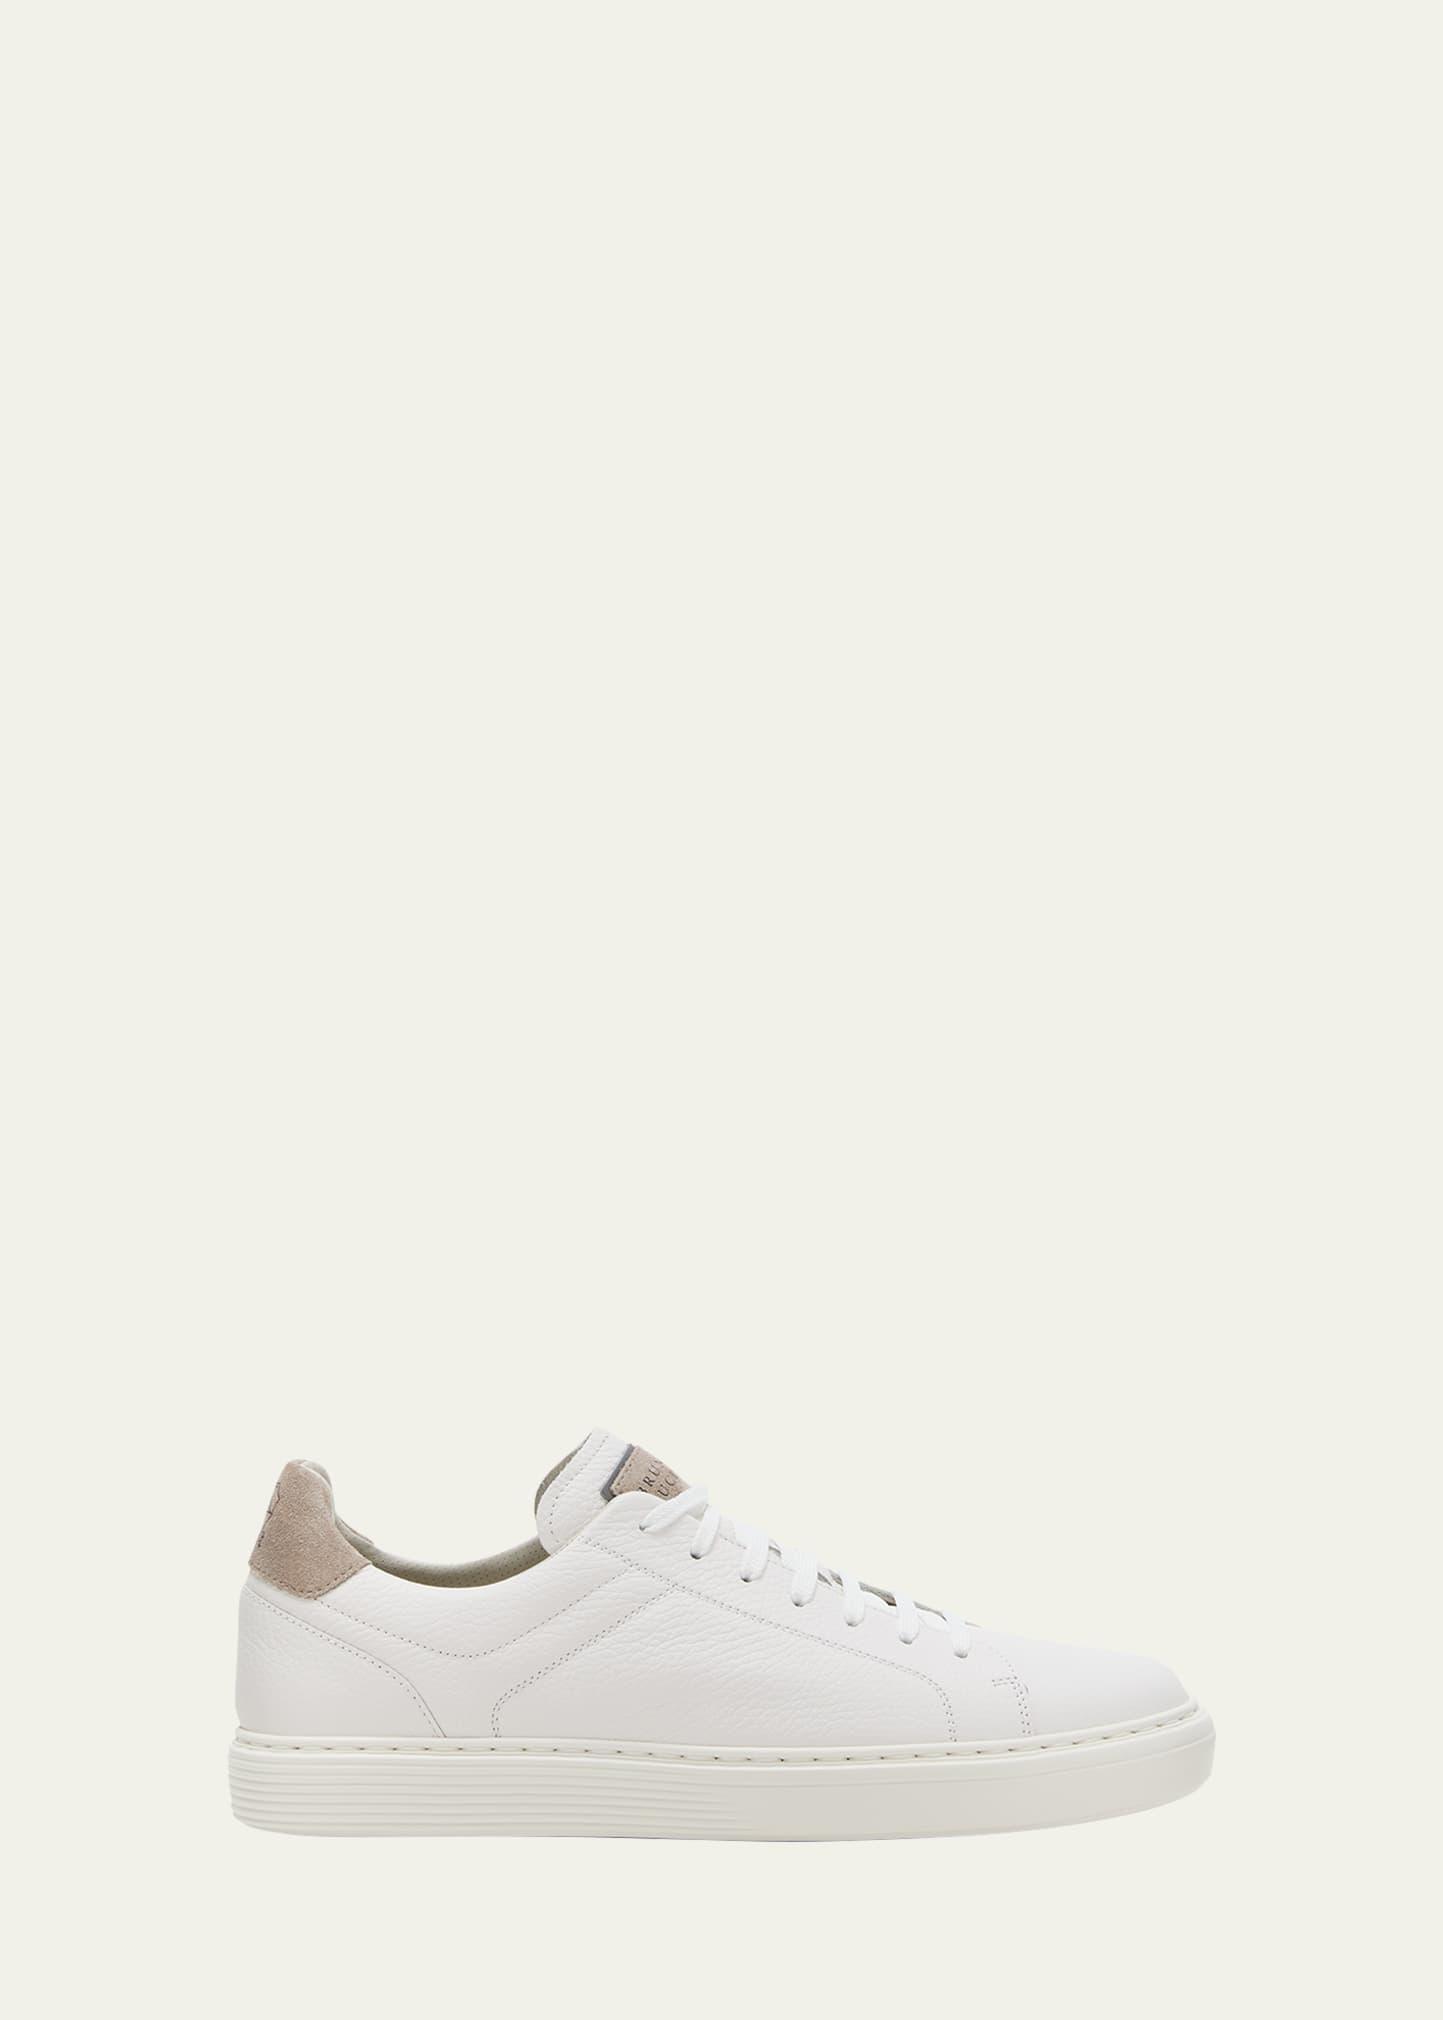 Brunello Cucinelli Grained Leather Sneaker Product Image